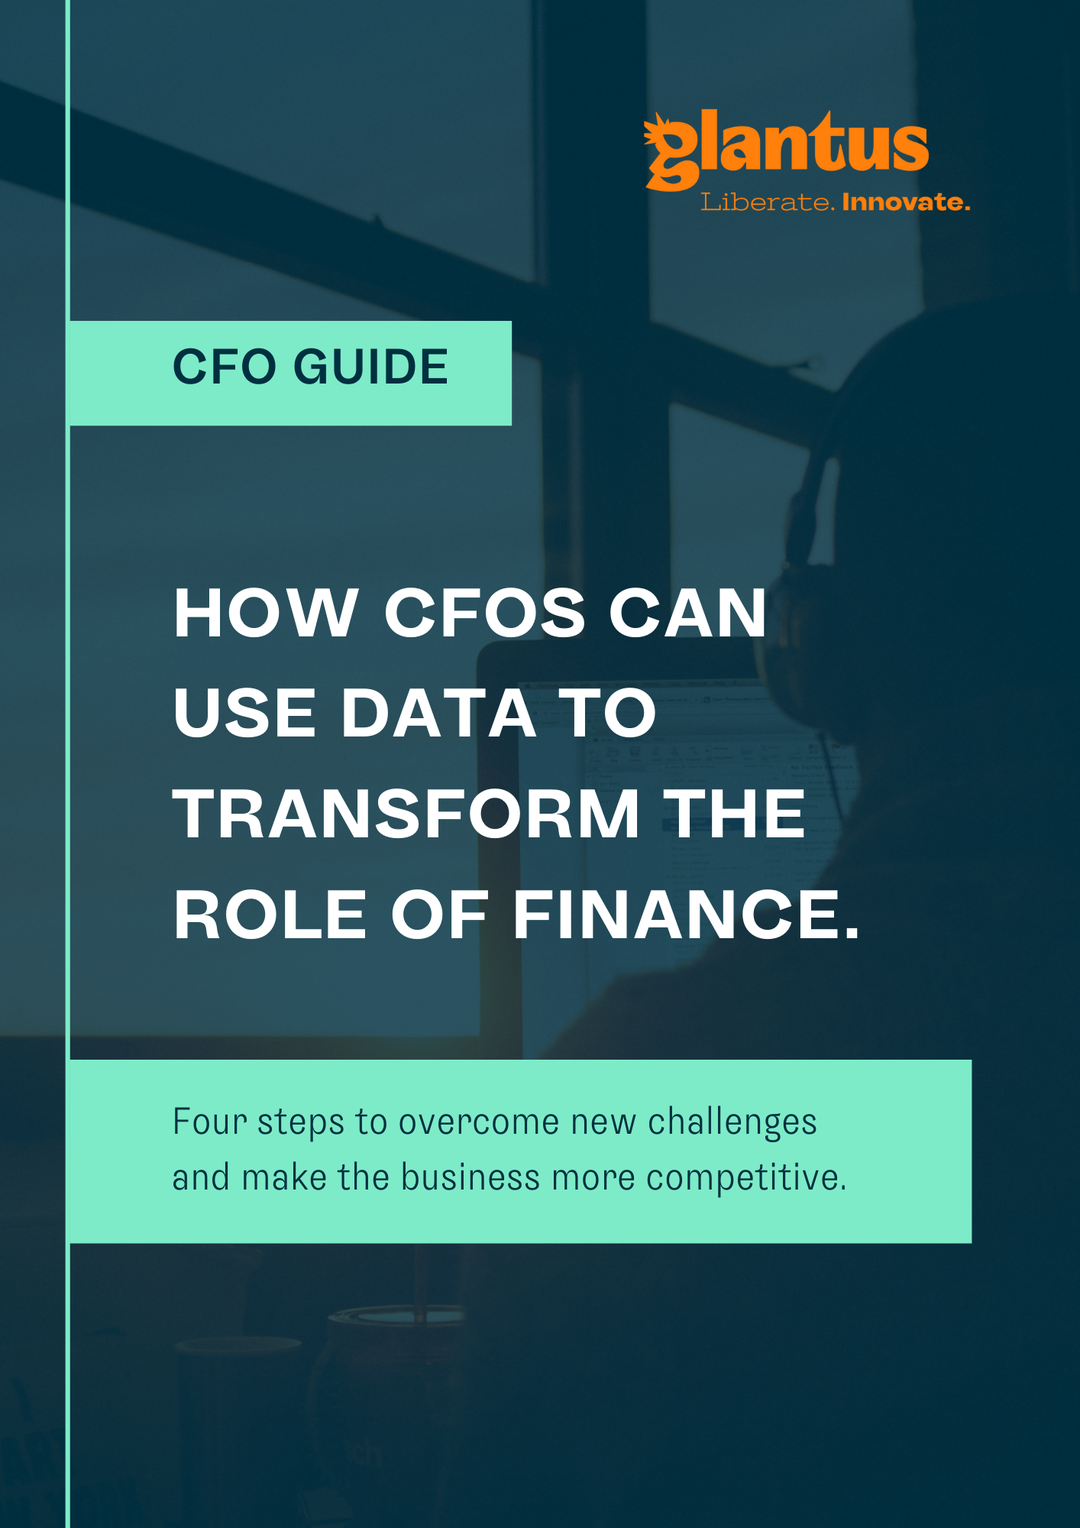 How CFOs can use data to transform the role of finance